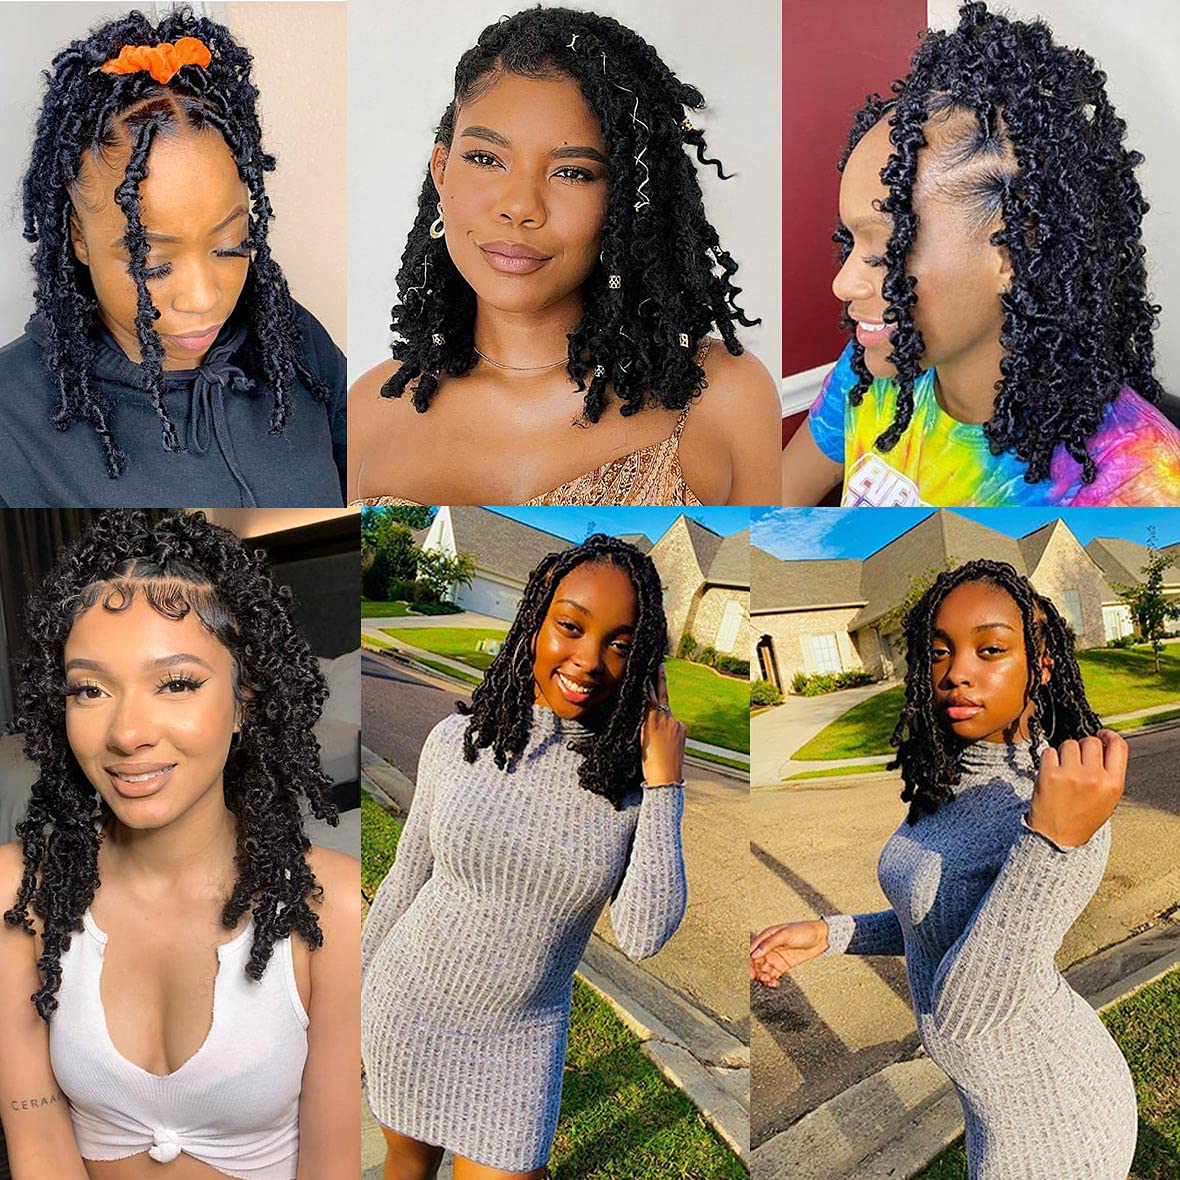 Xtrend Pre-Separated Springy Afro Twist Hair 8 Packs Spring Twist Hair For Distressed Soft Locs Natural Black Long Marley Twist Braiding Hair Synthetic Hair Extension For Black Women